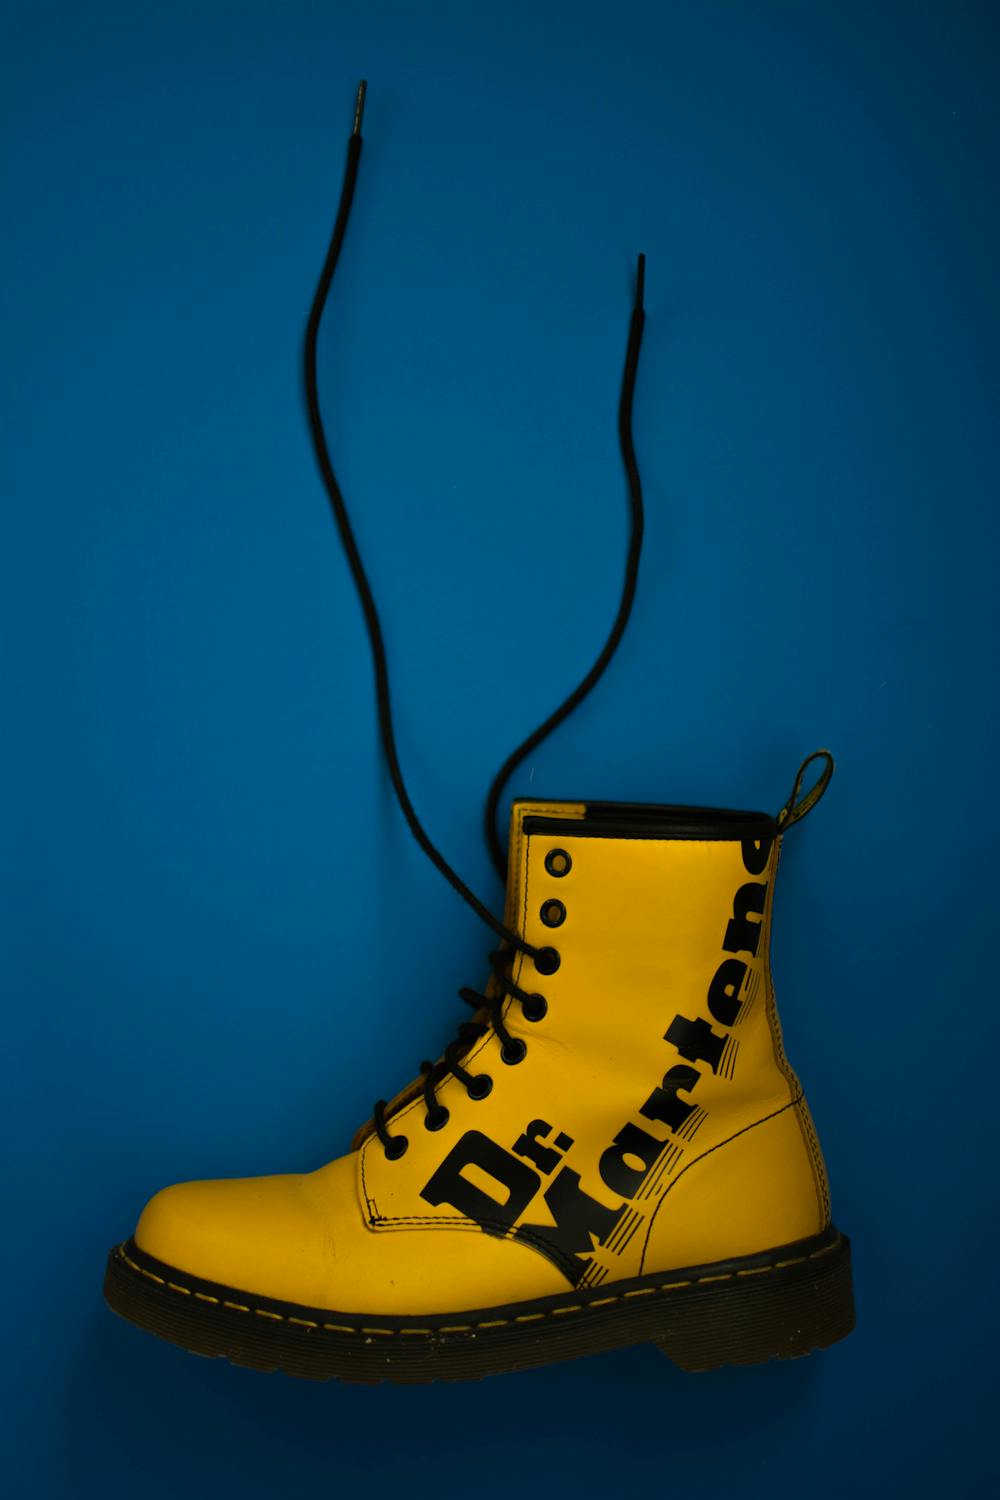 wearing Dr. Martens in the rain - about